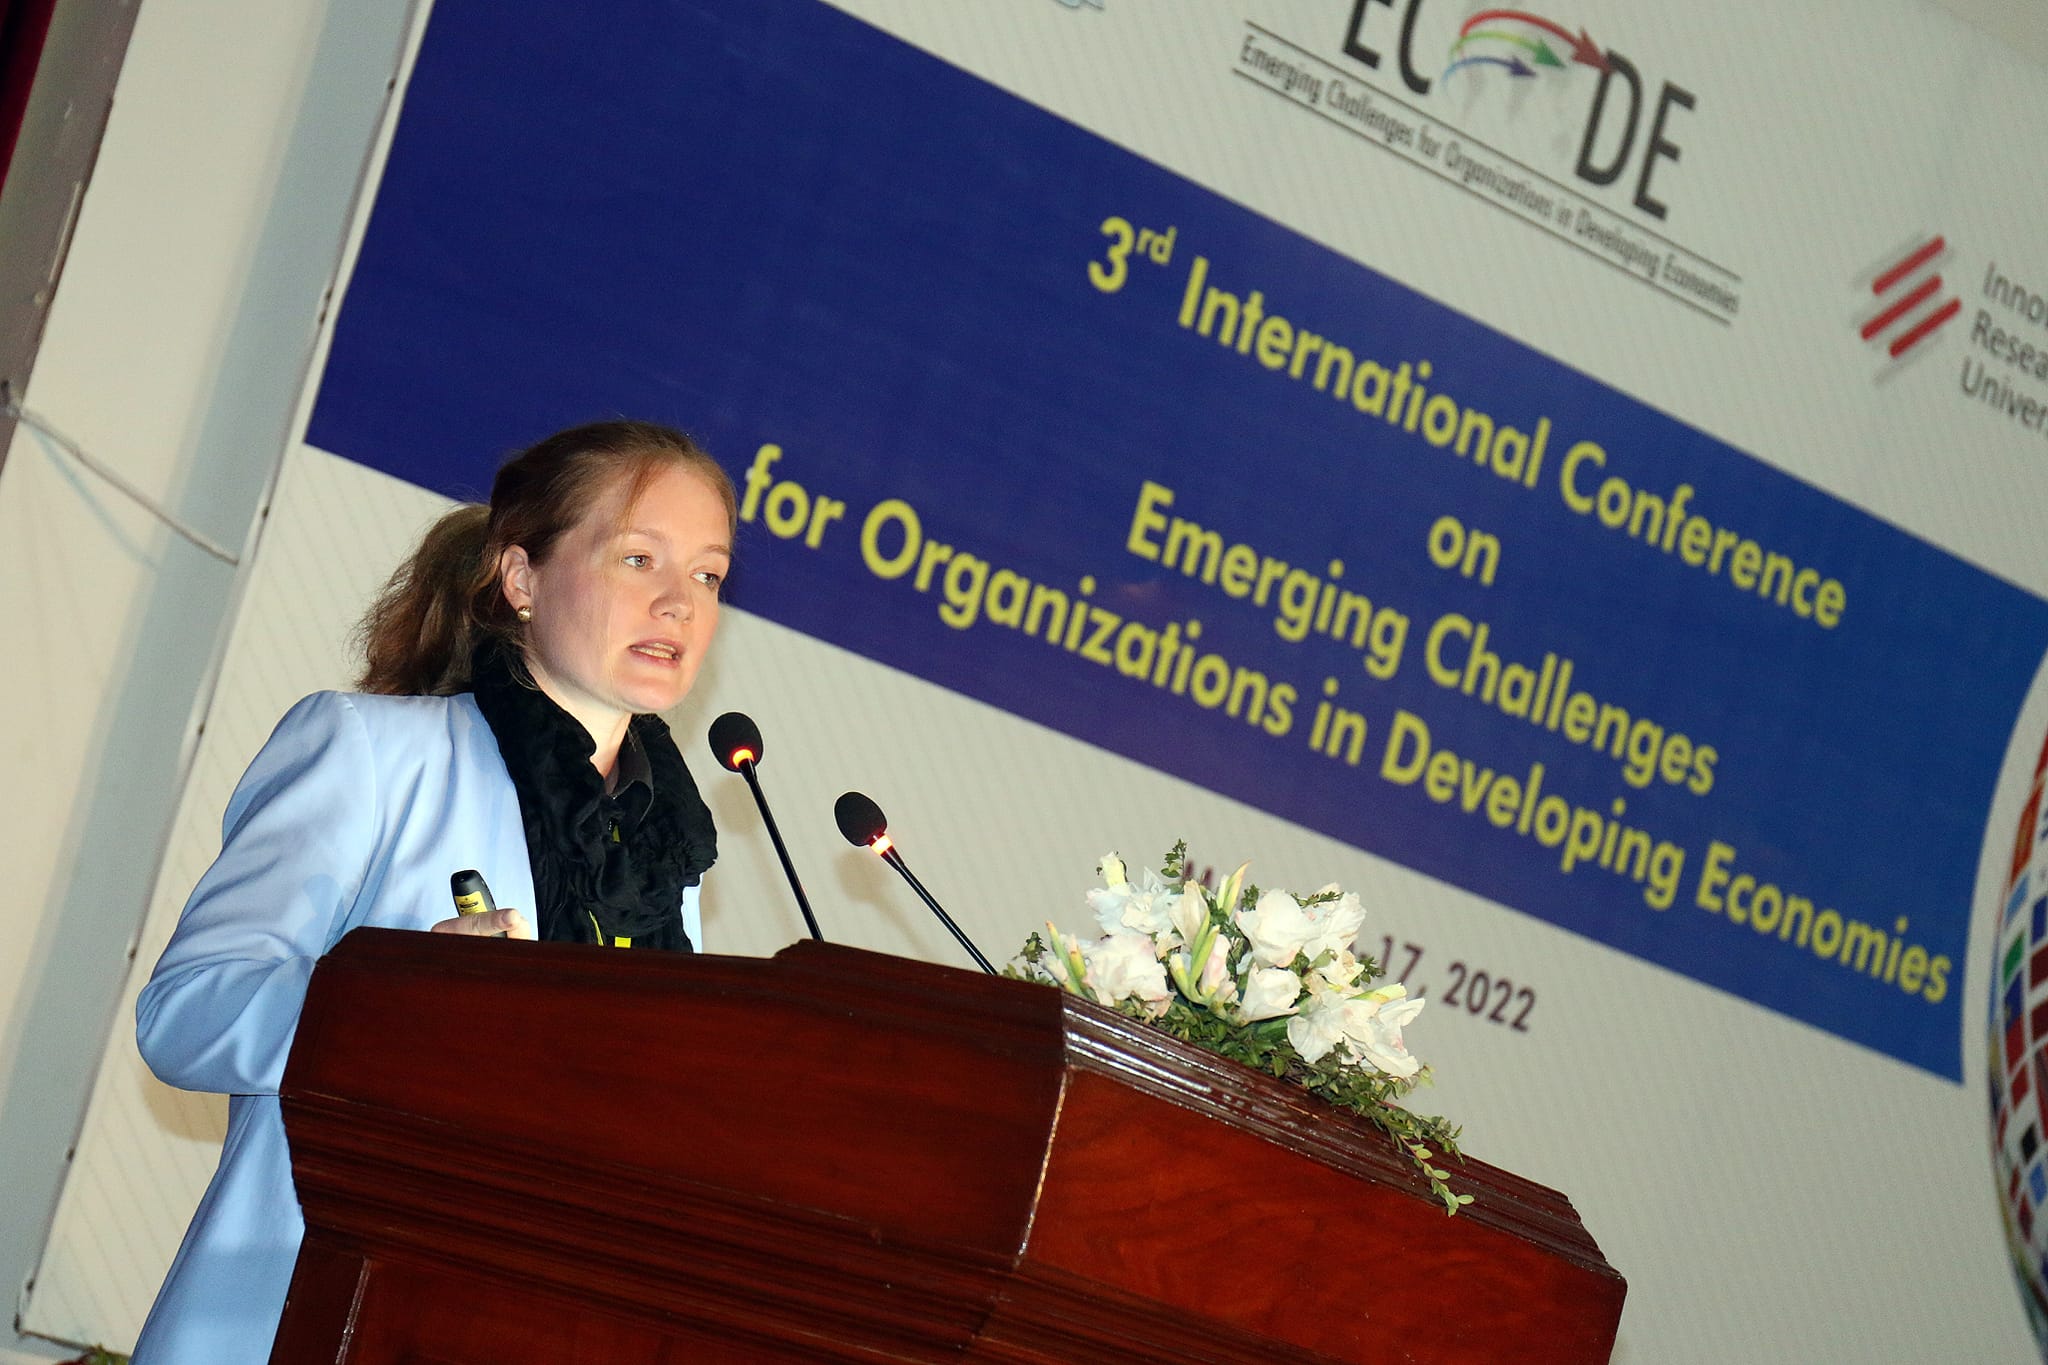 Dr Barbara Stępień is presenting her research at the international conference.